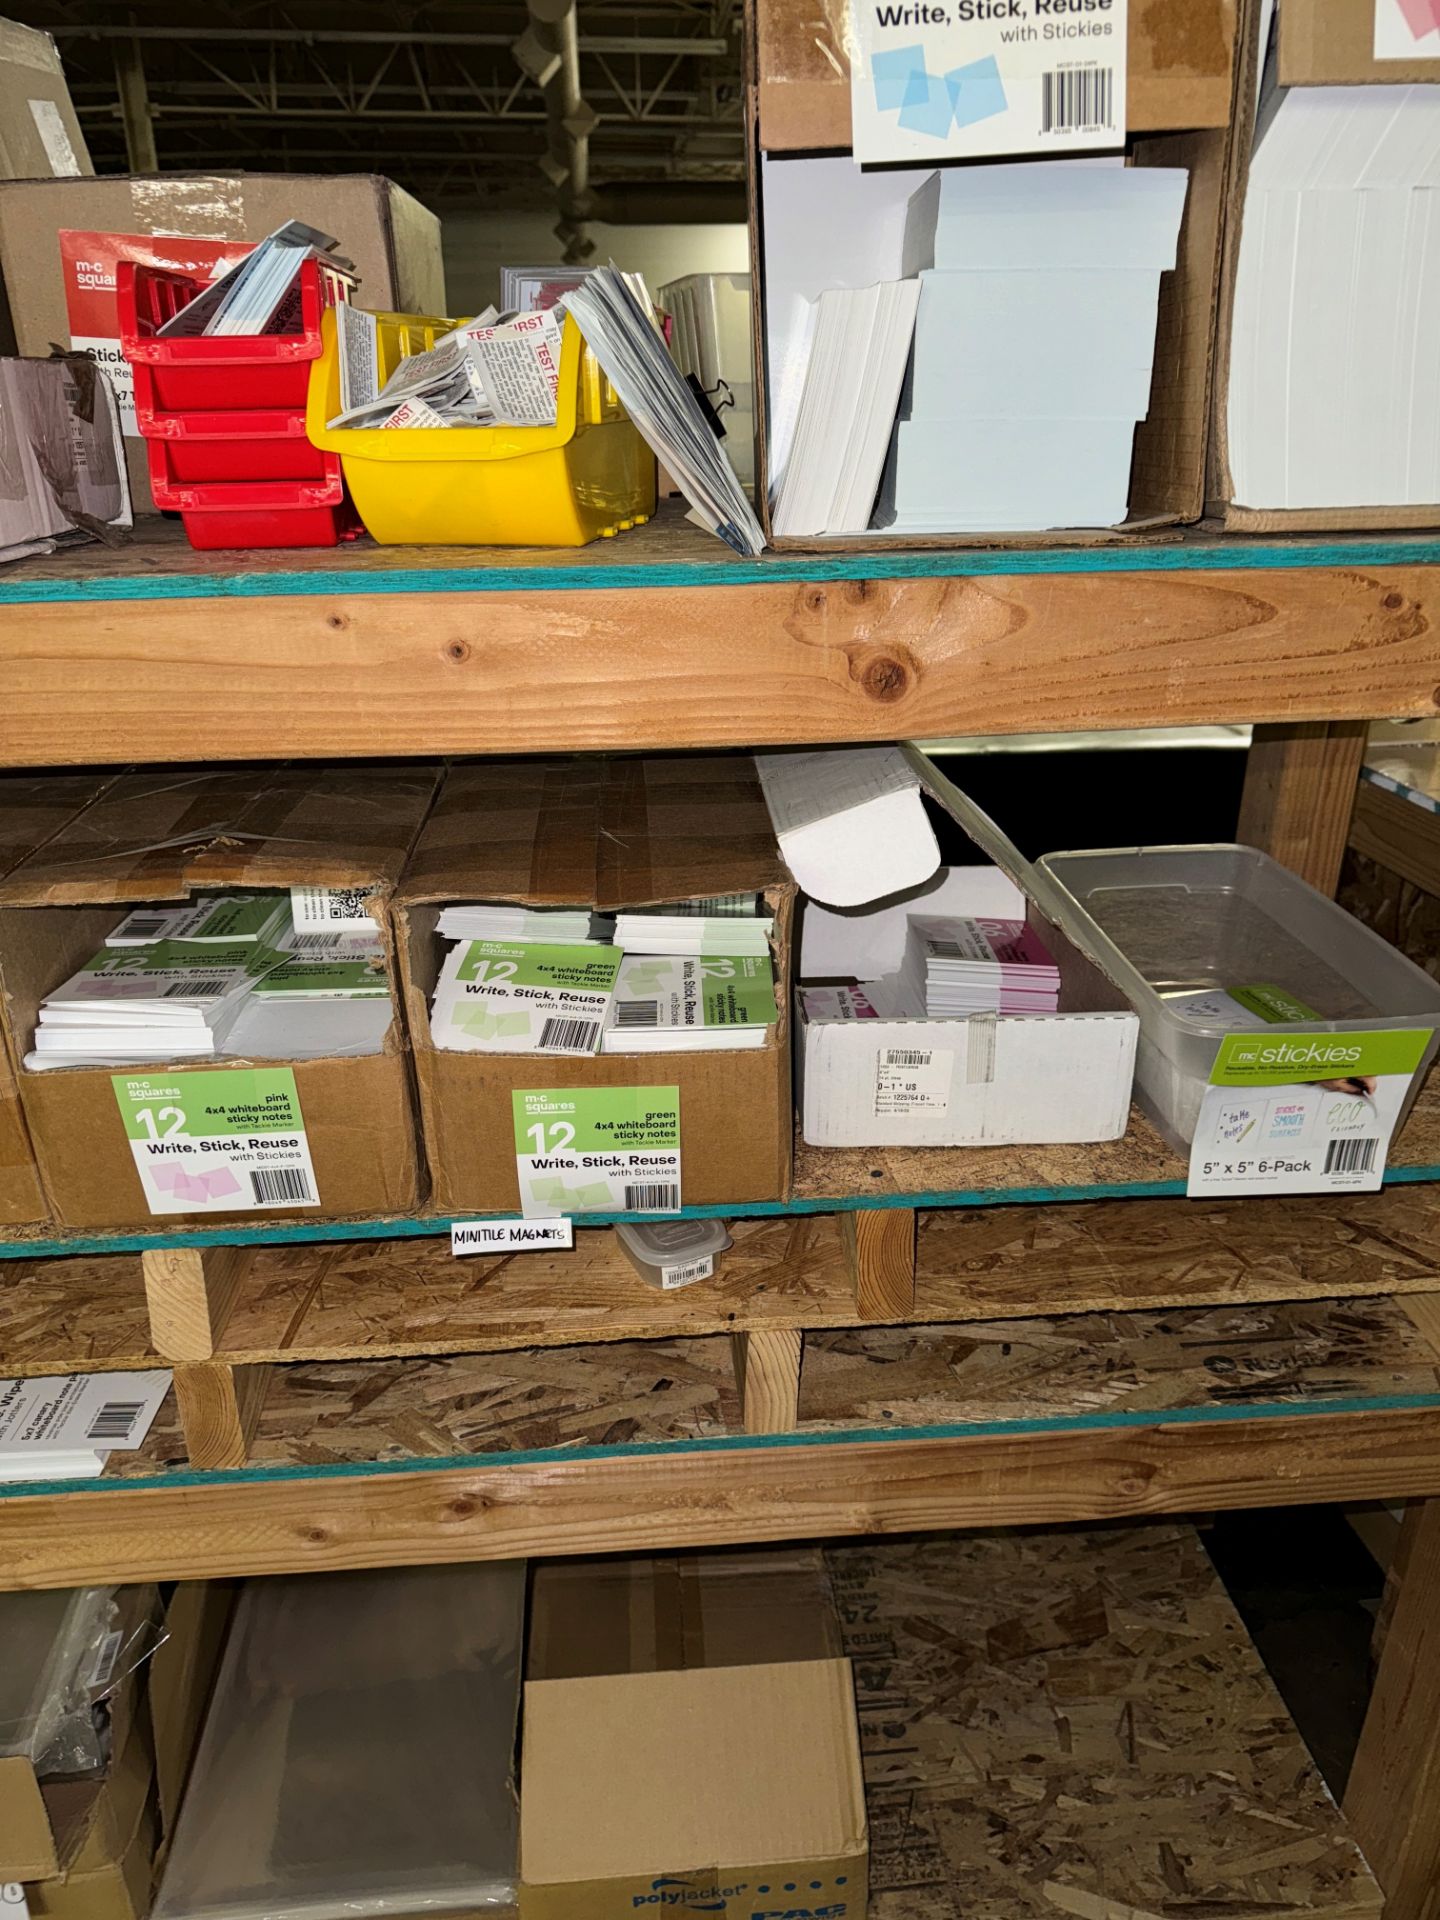 LOT (4) Wood Port. Shelves, 8' L w/ Contents Including Sticky Pads, Glue | Rig Fee $125 - Image 9 of 11